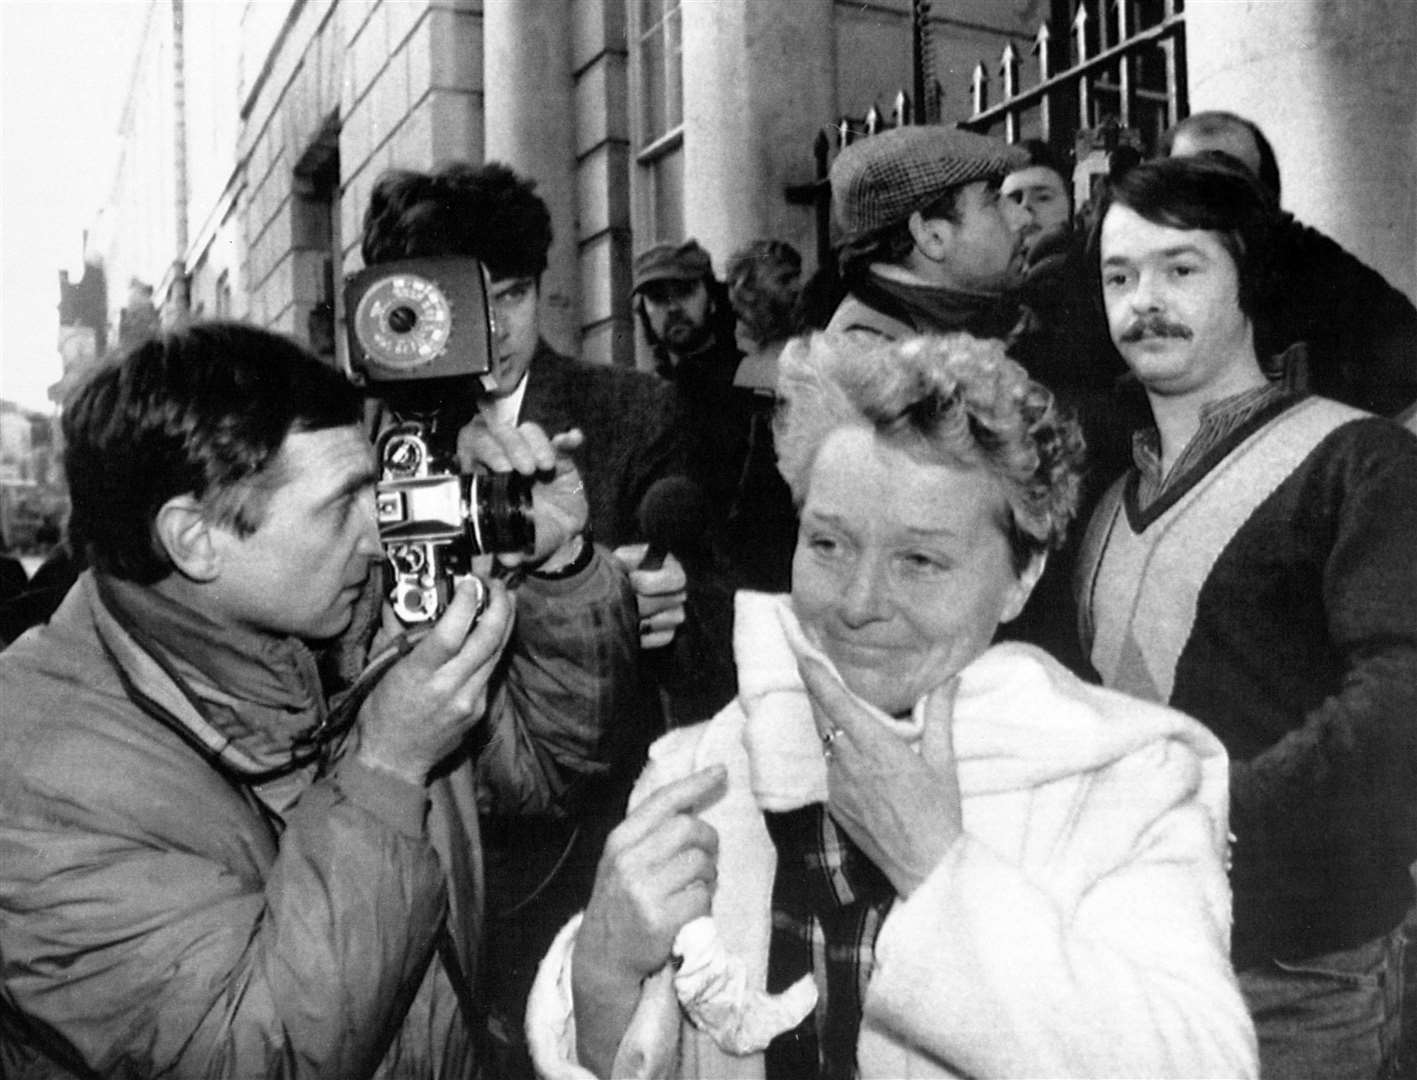 In 1987, Sylvia Bishop leaves Lewes Crown Court relieved at the jury’s not guilty verdicts clearing her son of killing the two Brighton schoolgirls (PA)